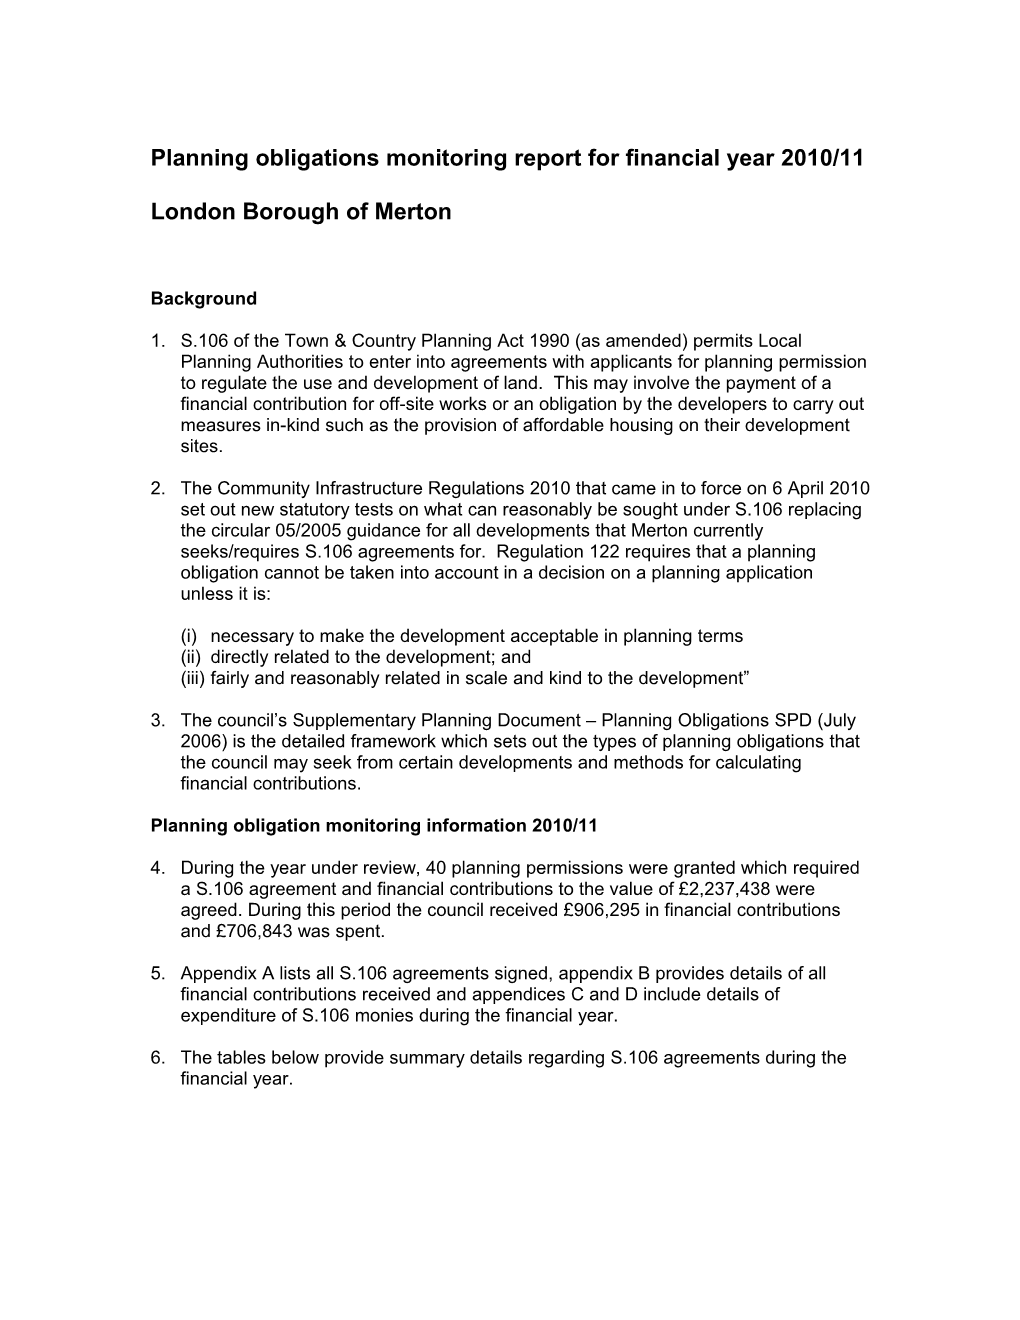 Planning Obligations Monitoring Report for Financial Year 2010/11